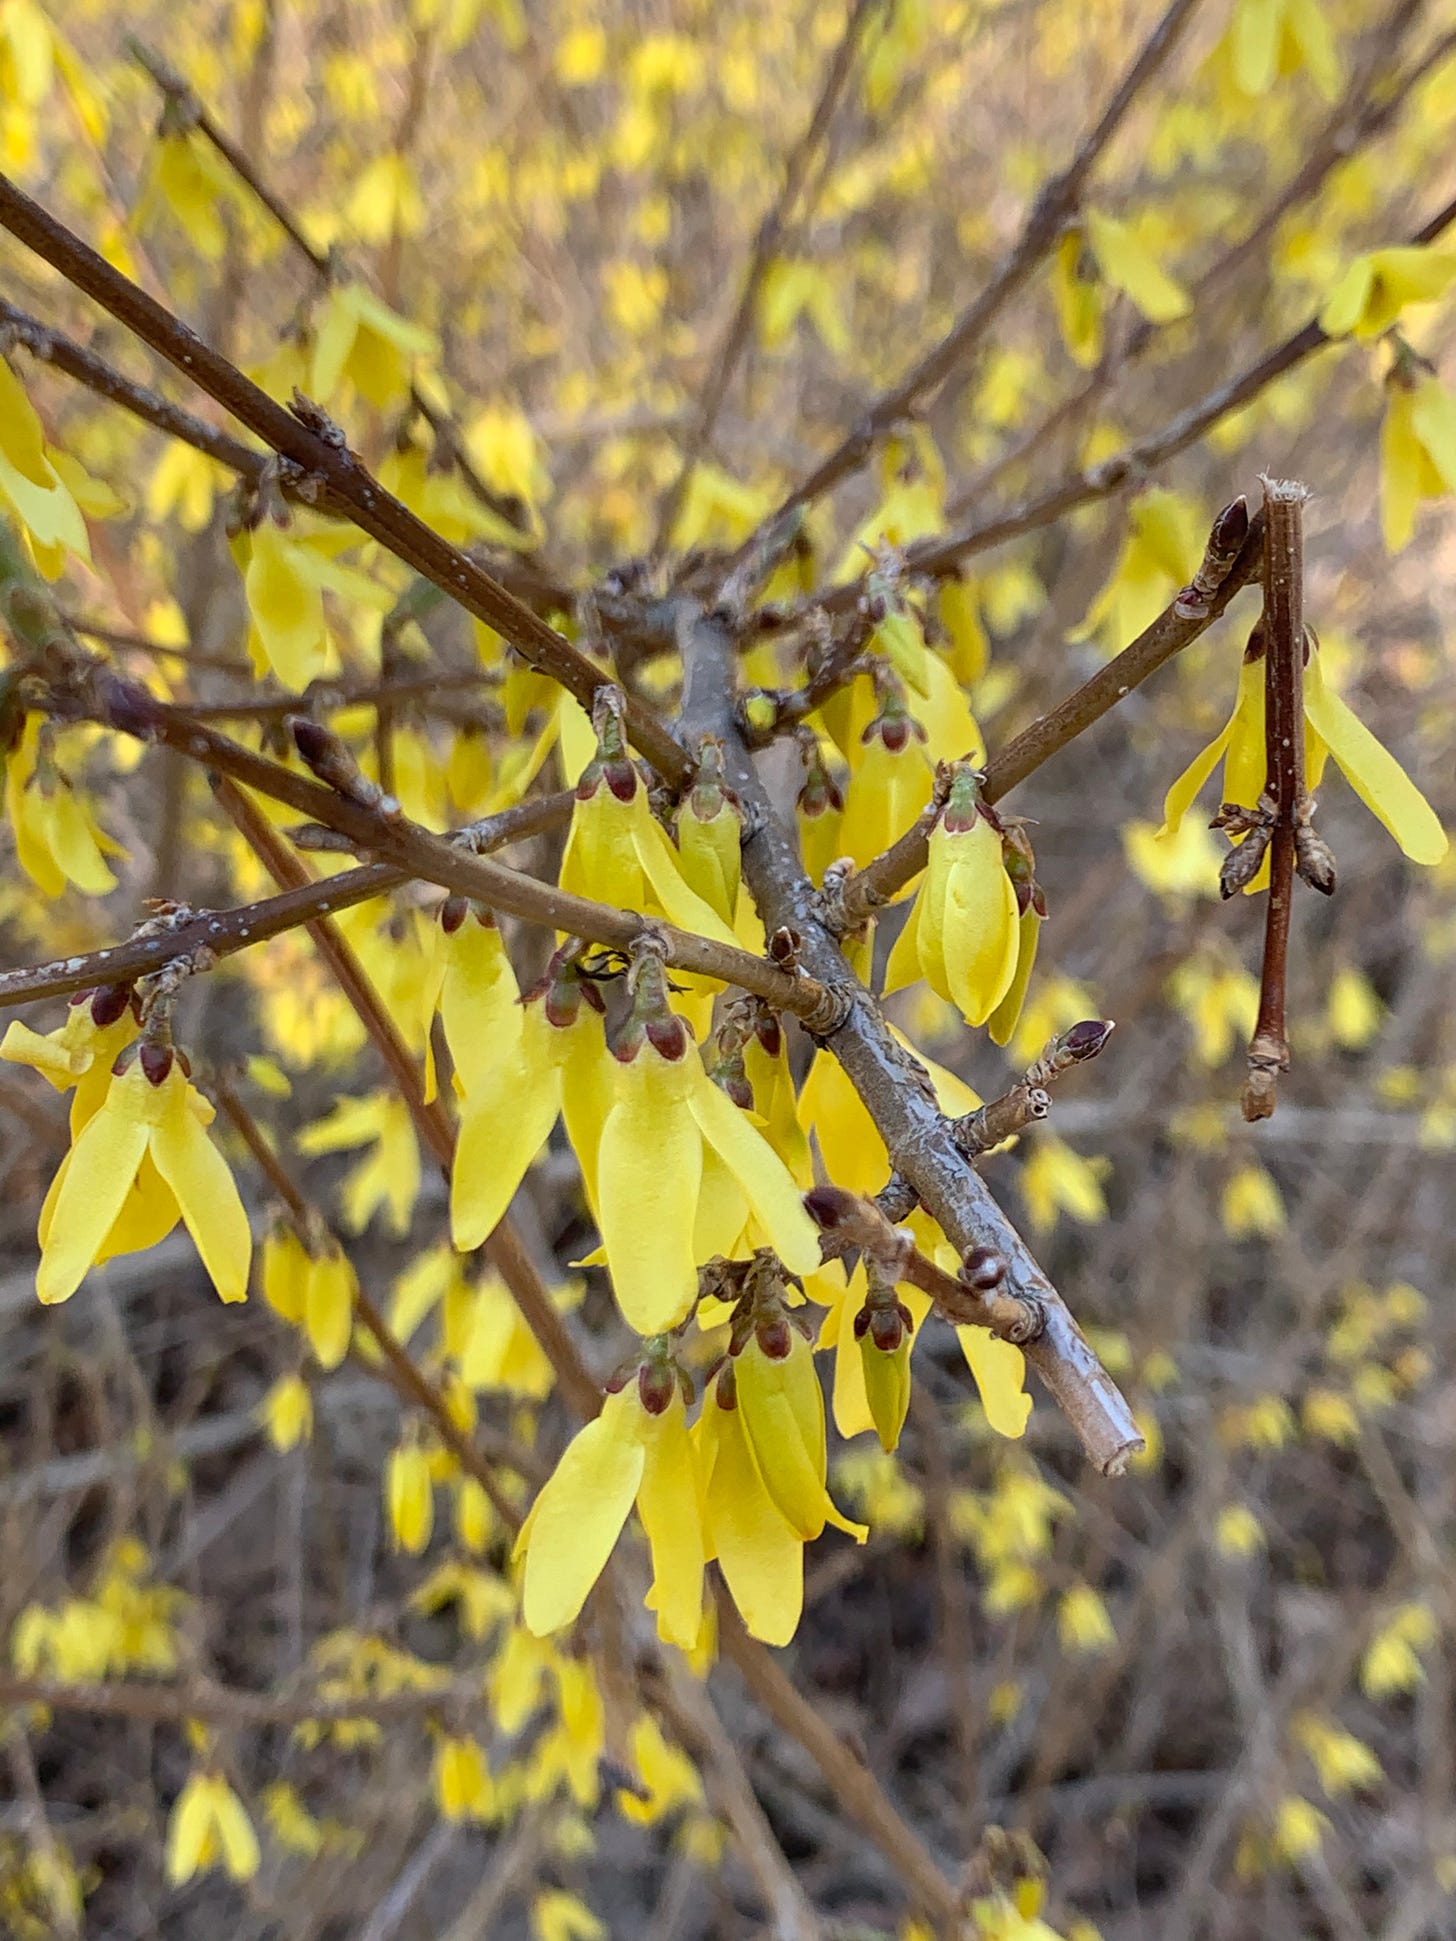 small yellow flowers drooping off of brown branches.